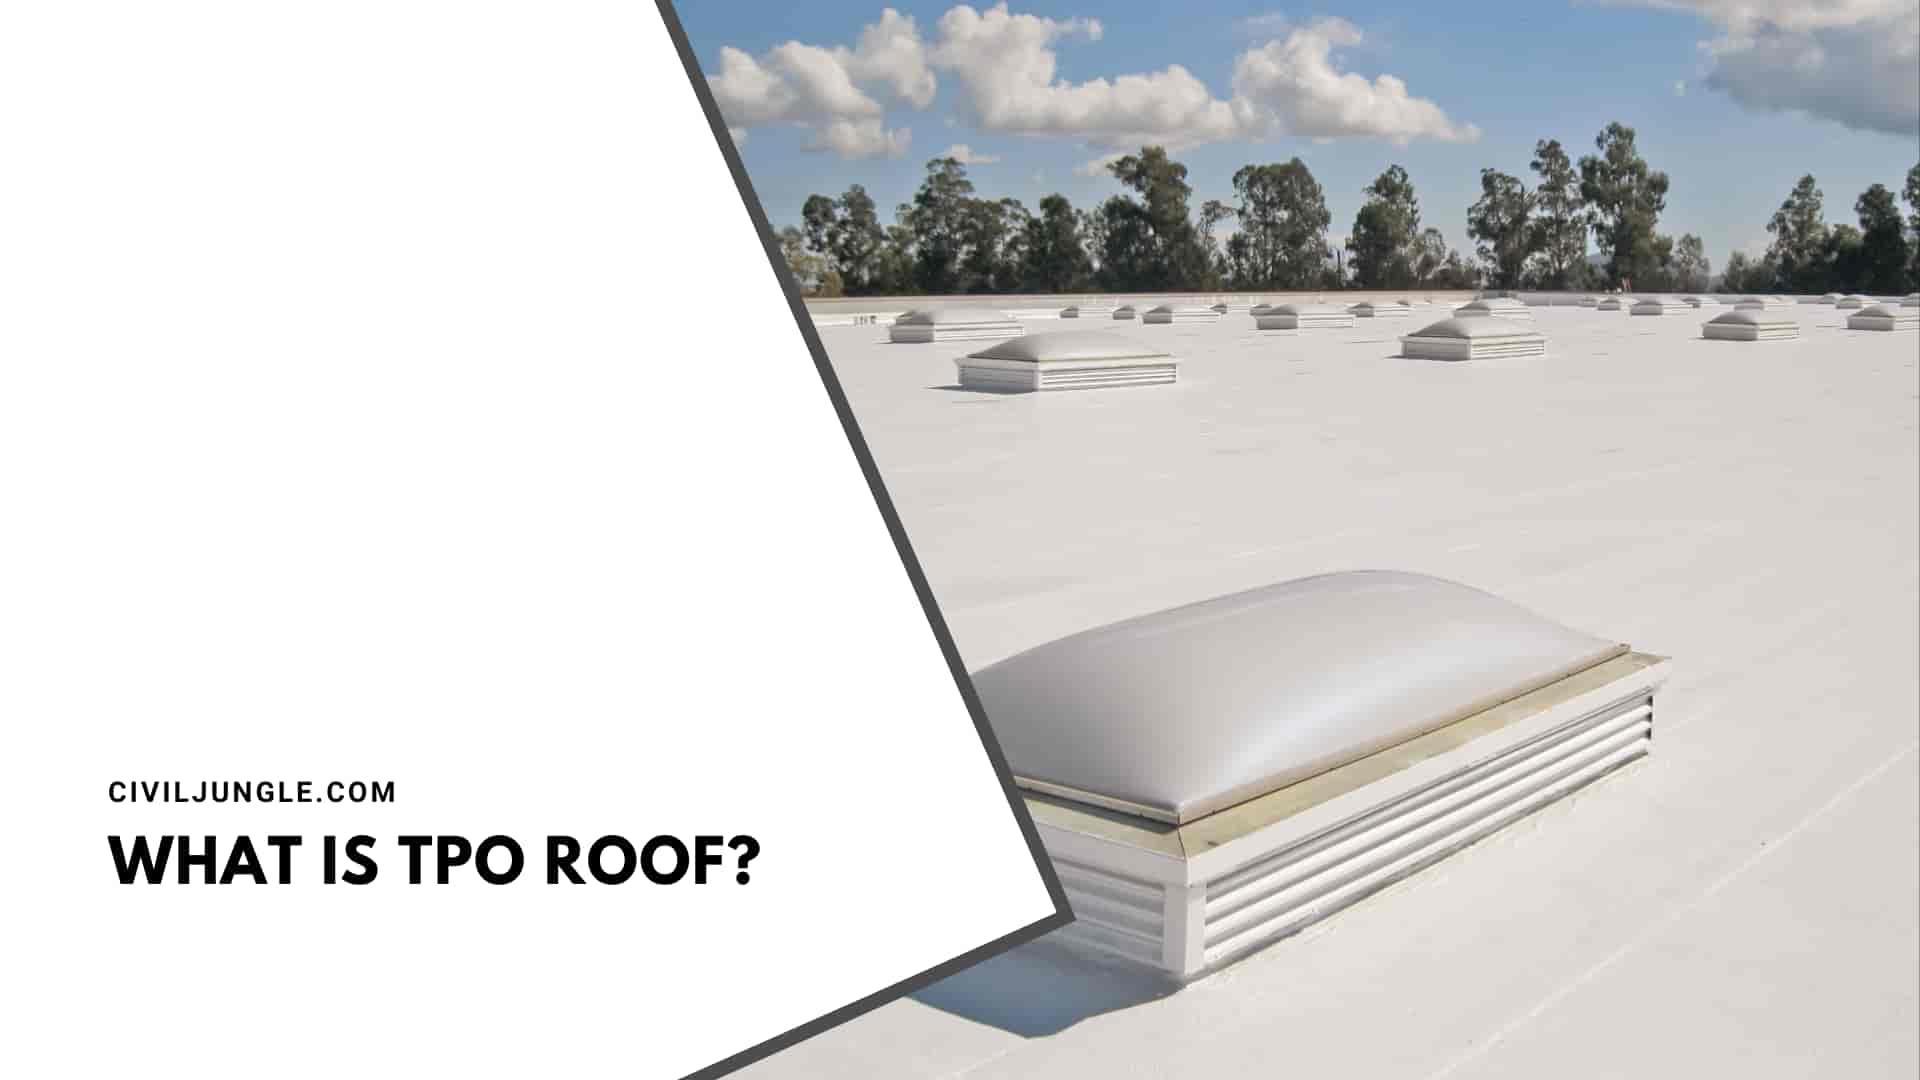 What Is TPO Roof?